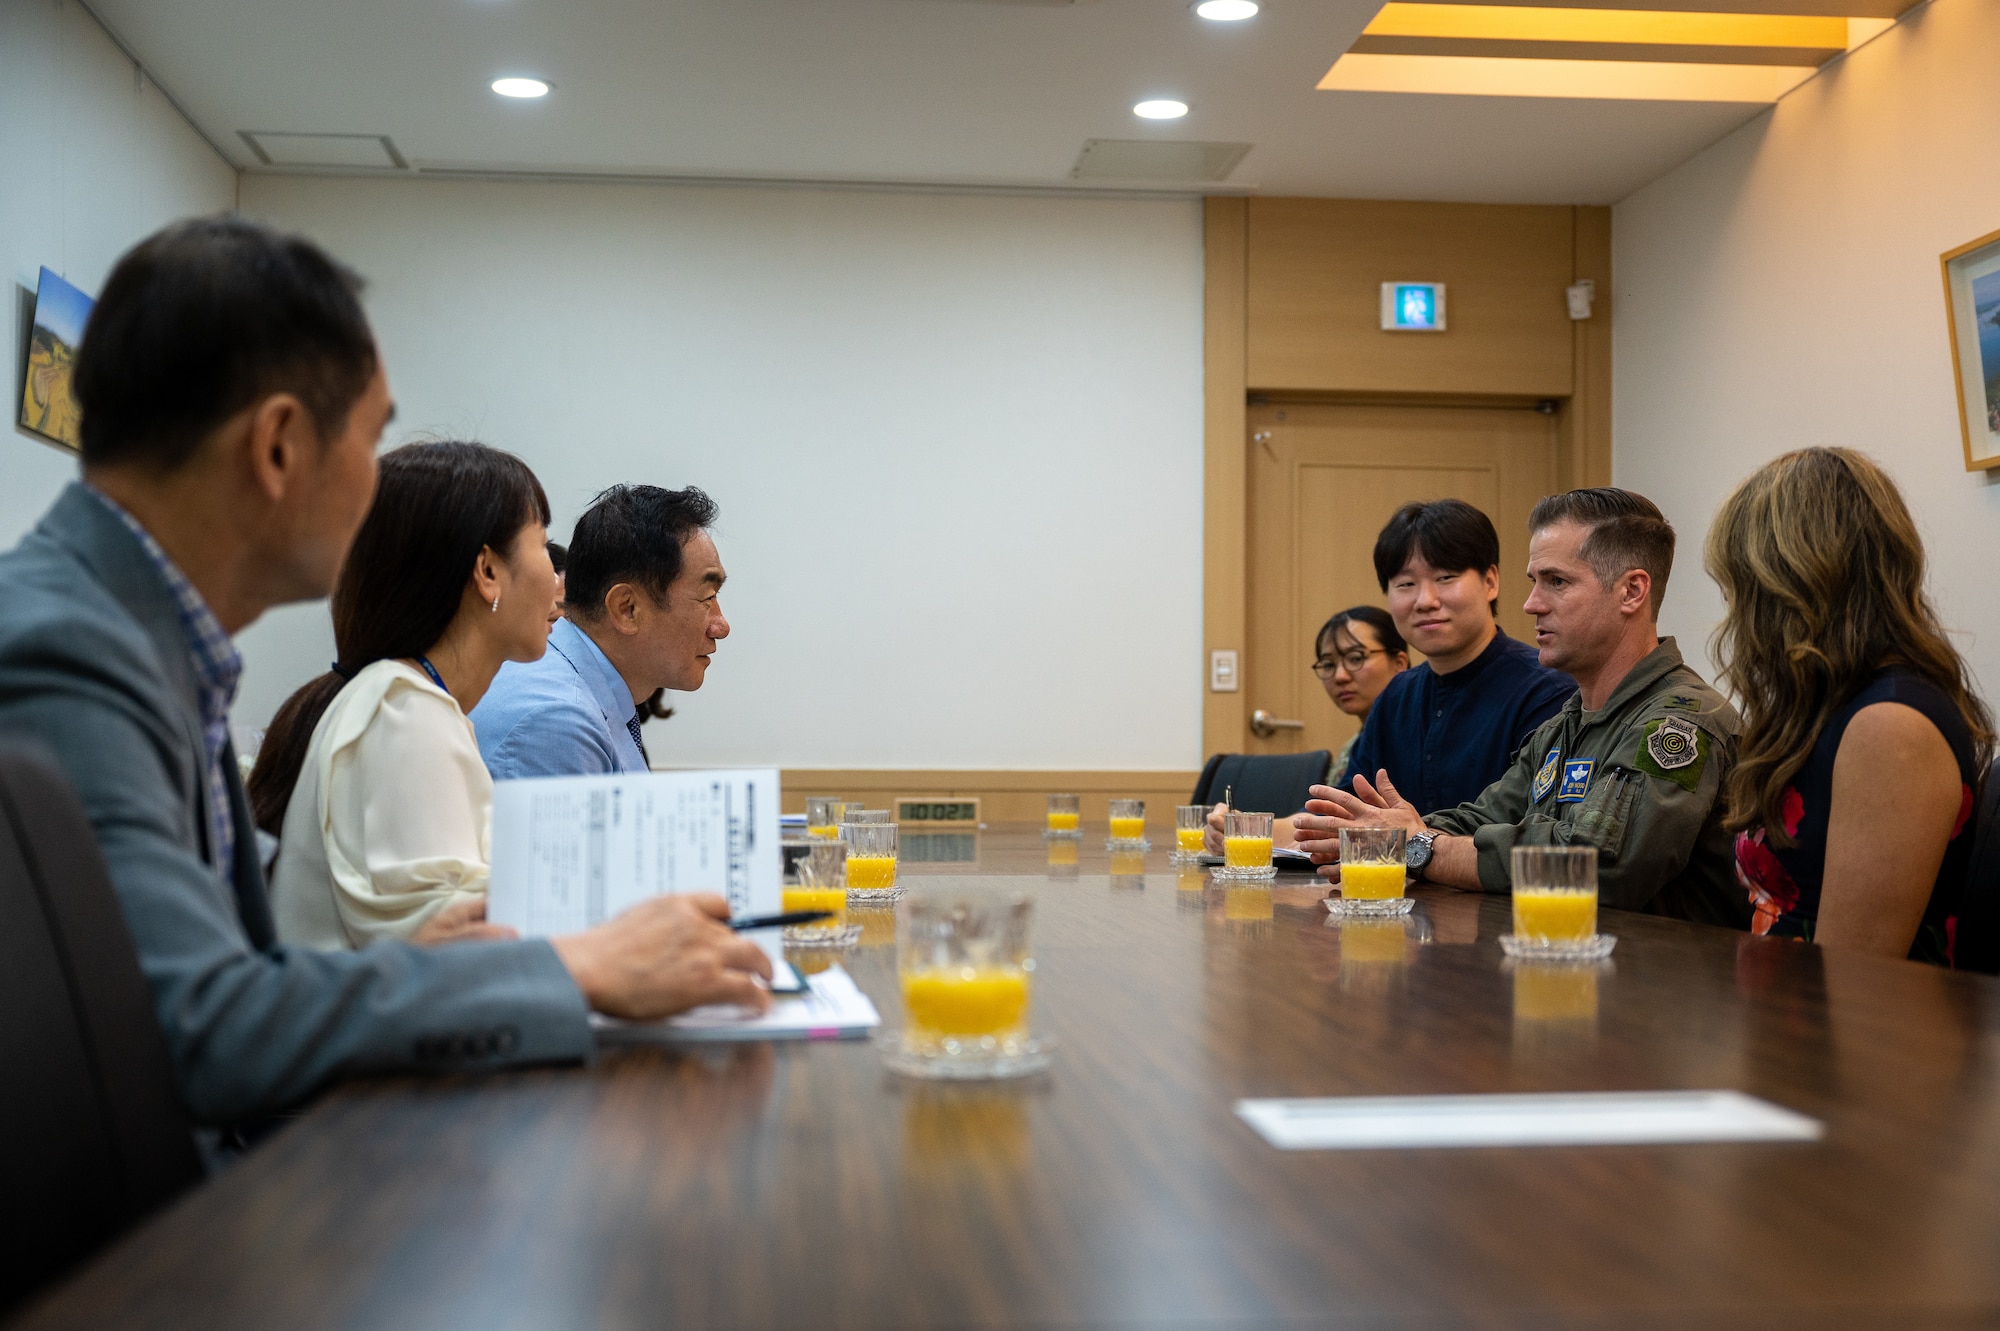 U.S. Air Force Col. Joshua Wood, right, 51st Fighter Wing Commander, speaks with Mr. Jung, Jang Seon, left, Pyeongtaek City mayor, during a meeting at Pyeongtaek City Hall, Republic of Korea, June 1, 2023. During a ceremony held at City Hall, Pyeongtaek City bestowed honorary citizenship upon Wood and his wife. (U.S. Air Force photo by Senior Airman Thomas Sjoberg)